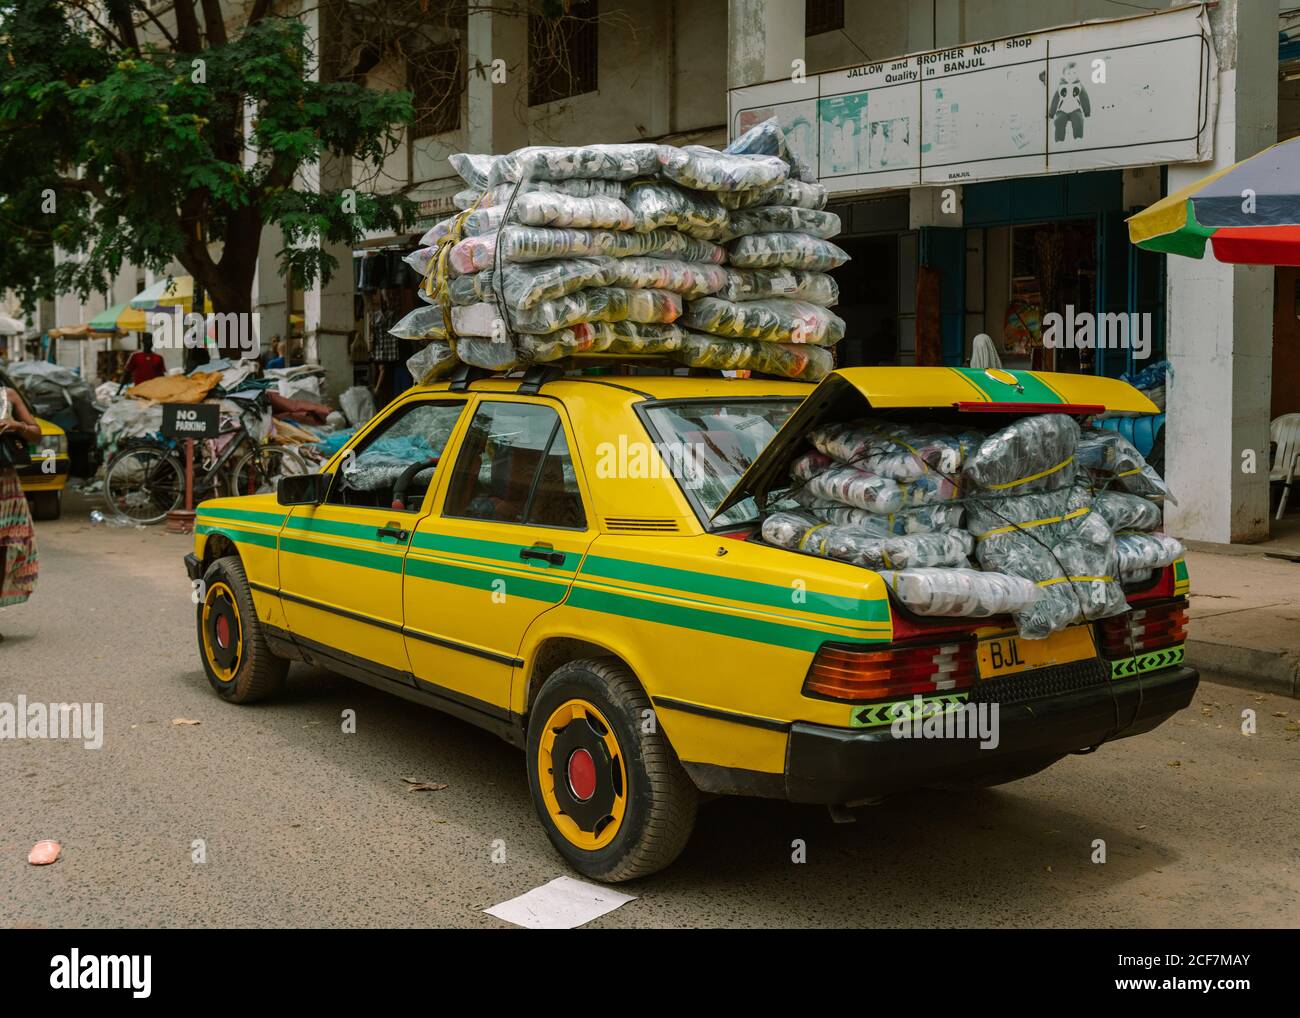 Gambia, Africa - August 5, 2019: Side view of yellow car overloaded with packaged shoes on roof and in trunk for selling in shop during transportation on village Stock Photo